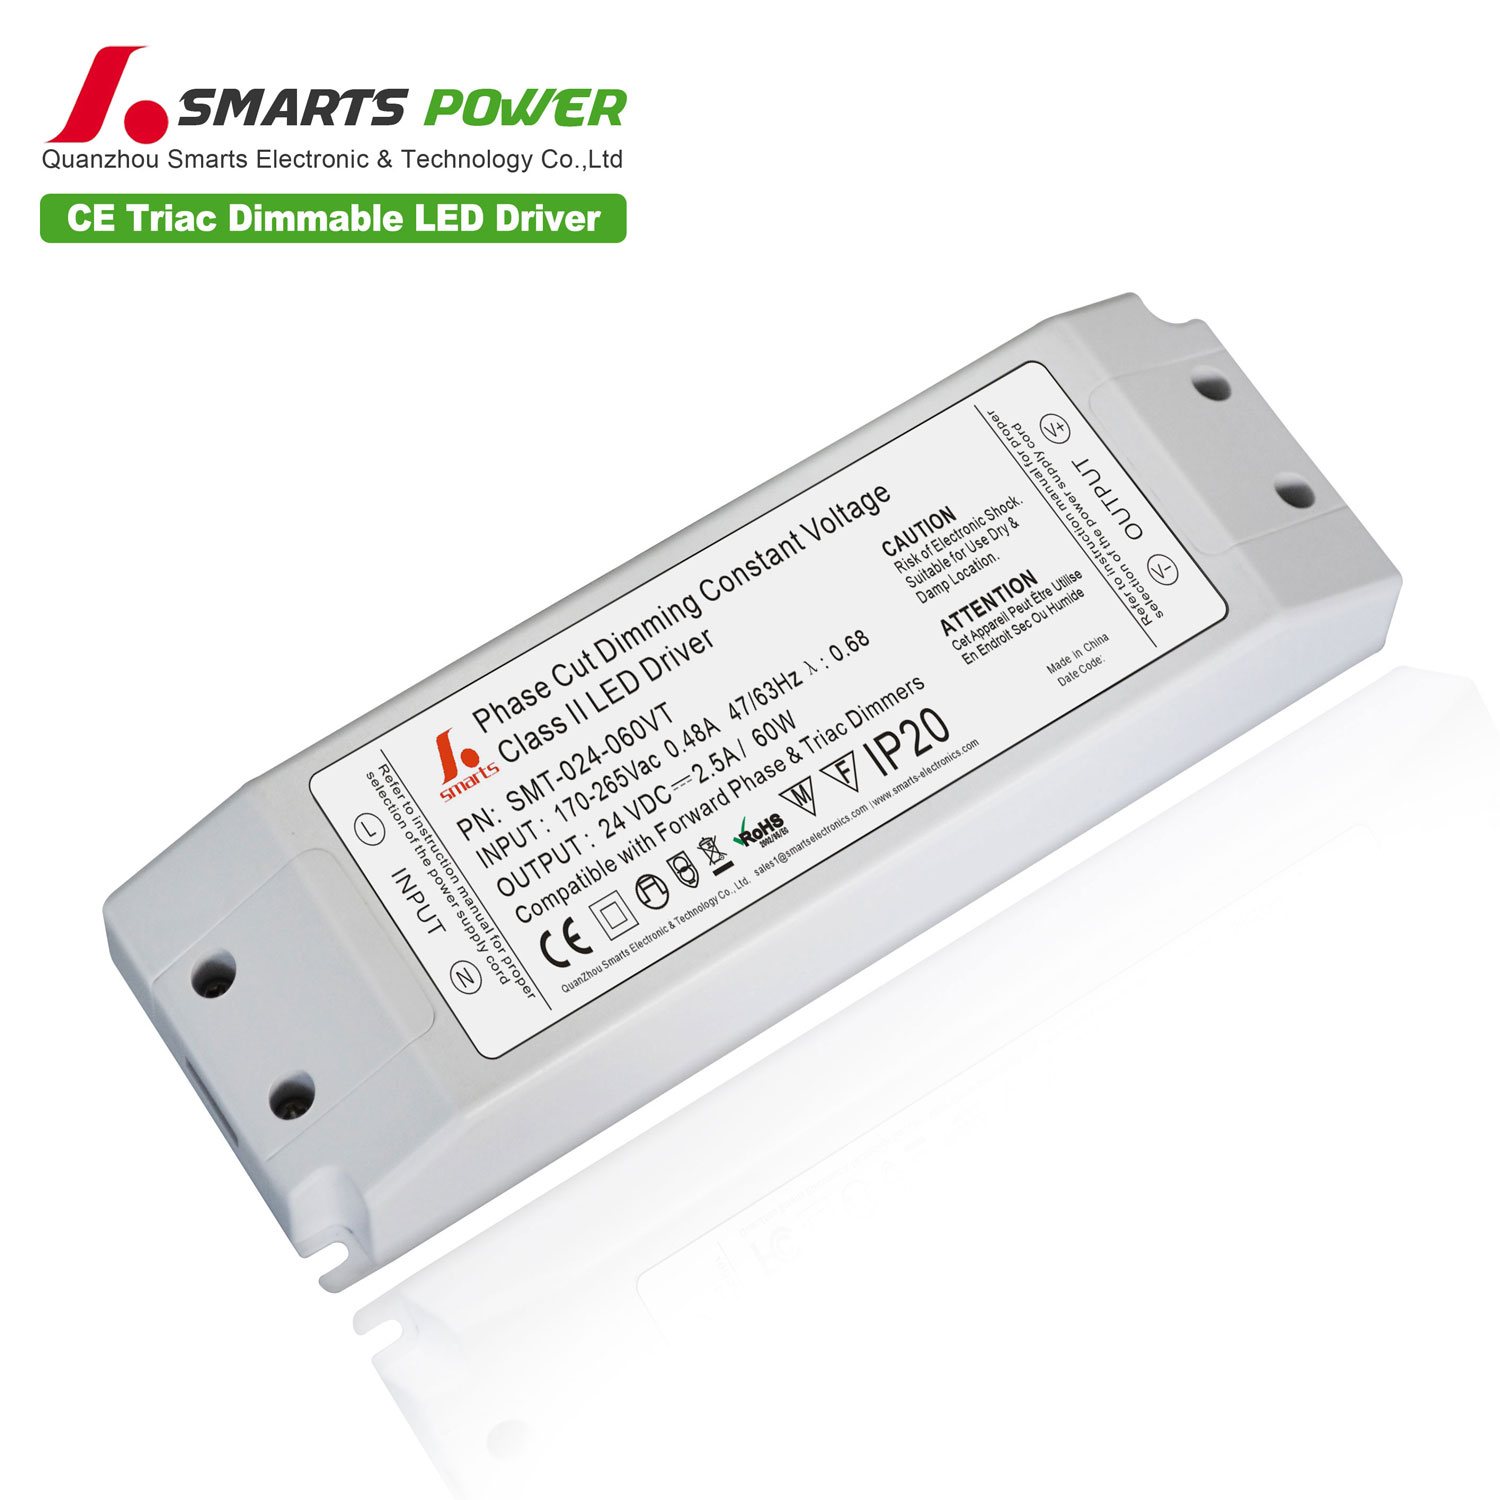 12vdc 75w triac dimmable led driver